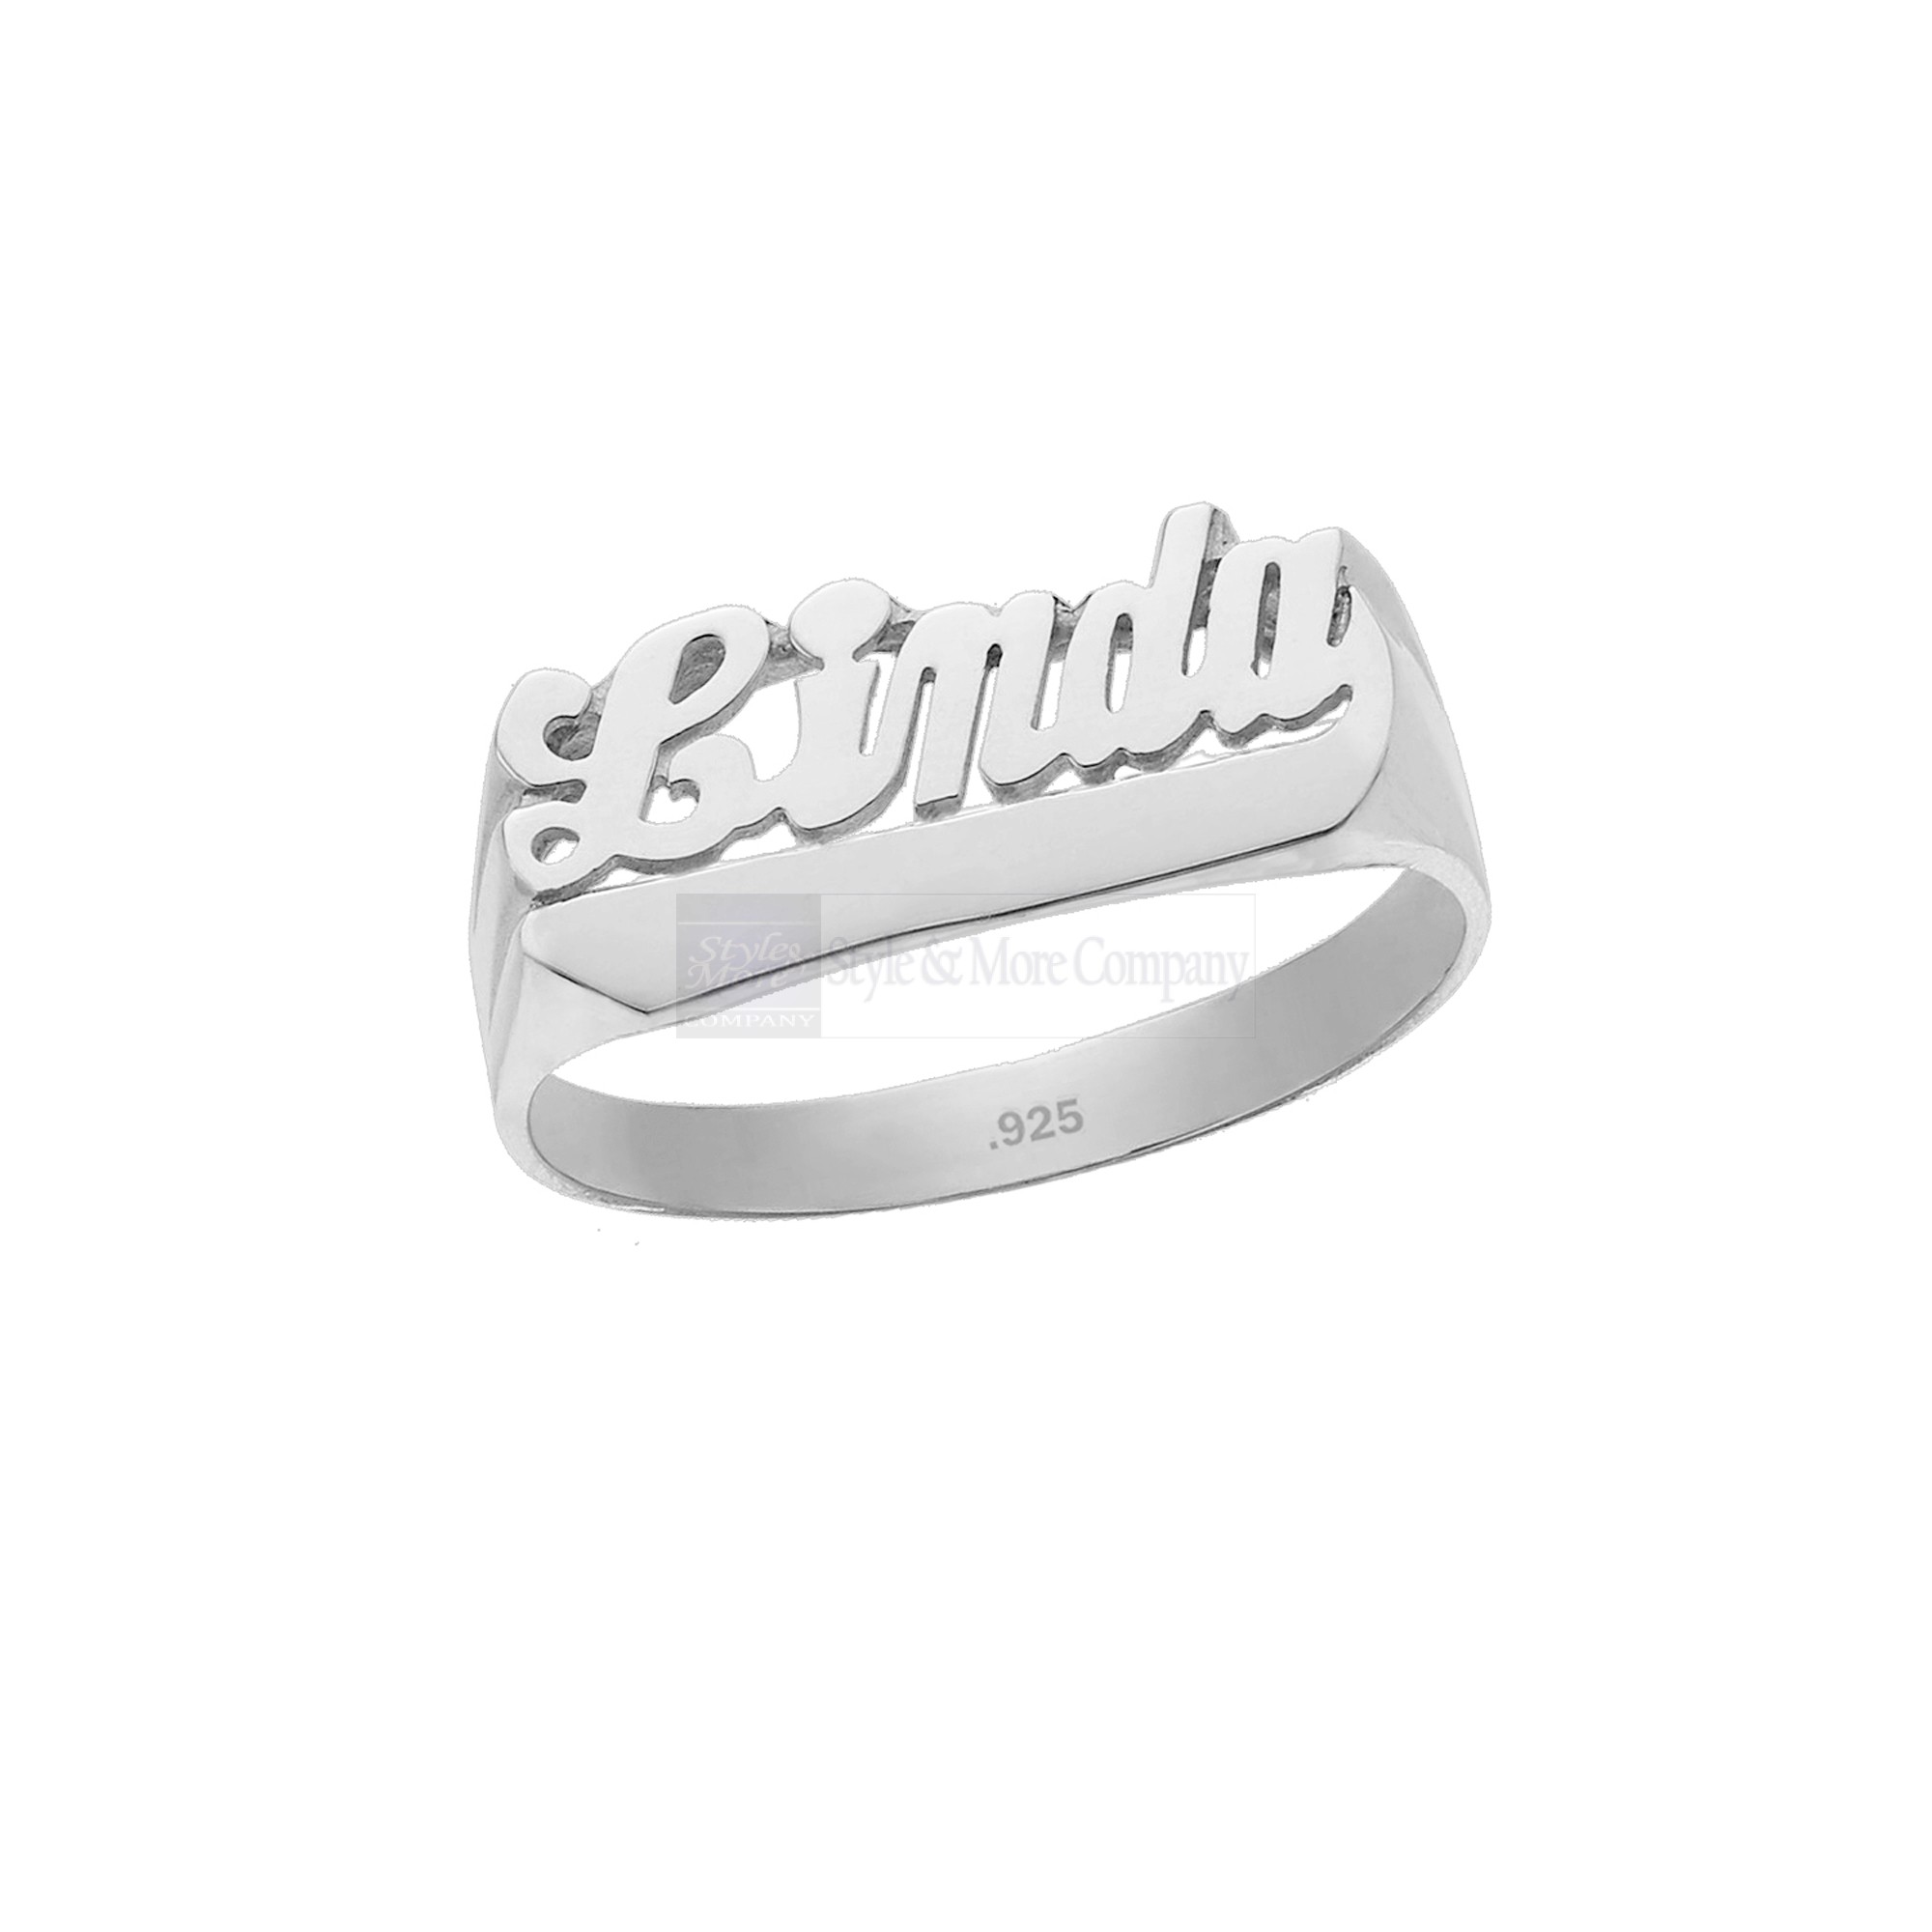 925 Sterling Silver Personalized Name Ring with Name of Your Choice Size 5 thru 10 Made in USA